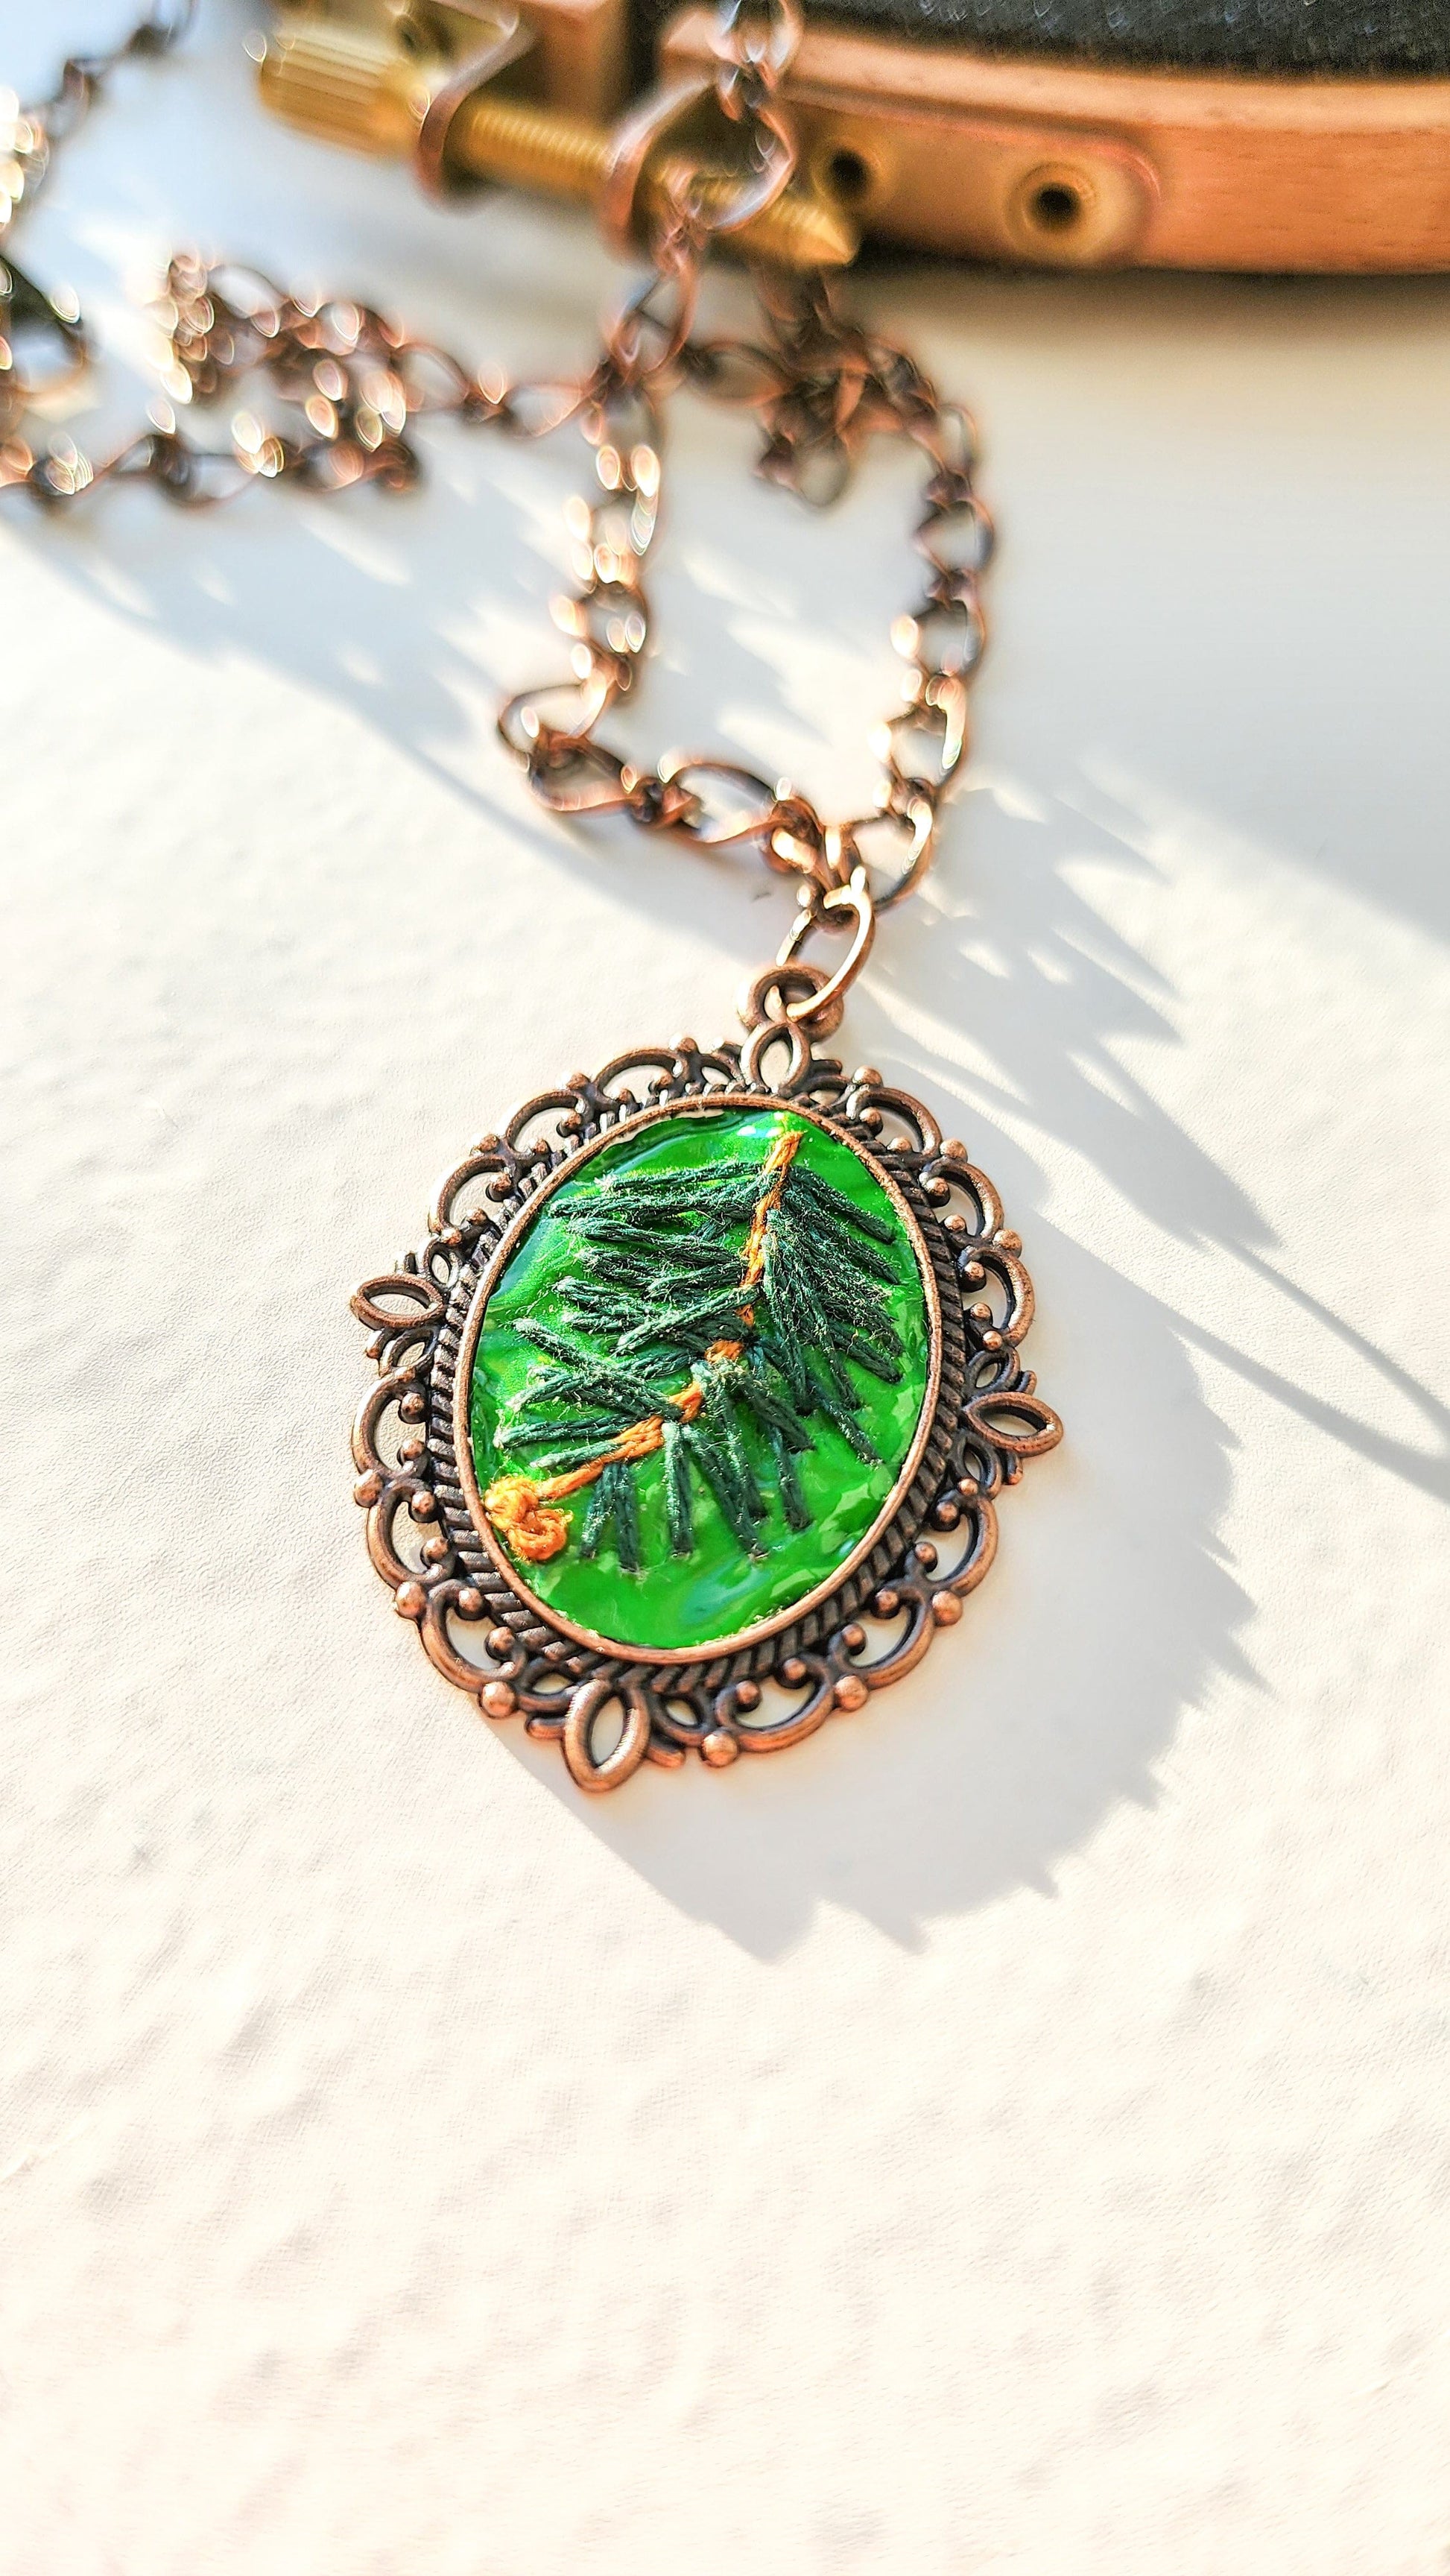 Embrace Embroidery Embroidered Necklace Hand Embroidered pine bough